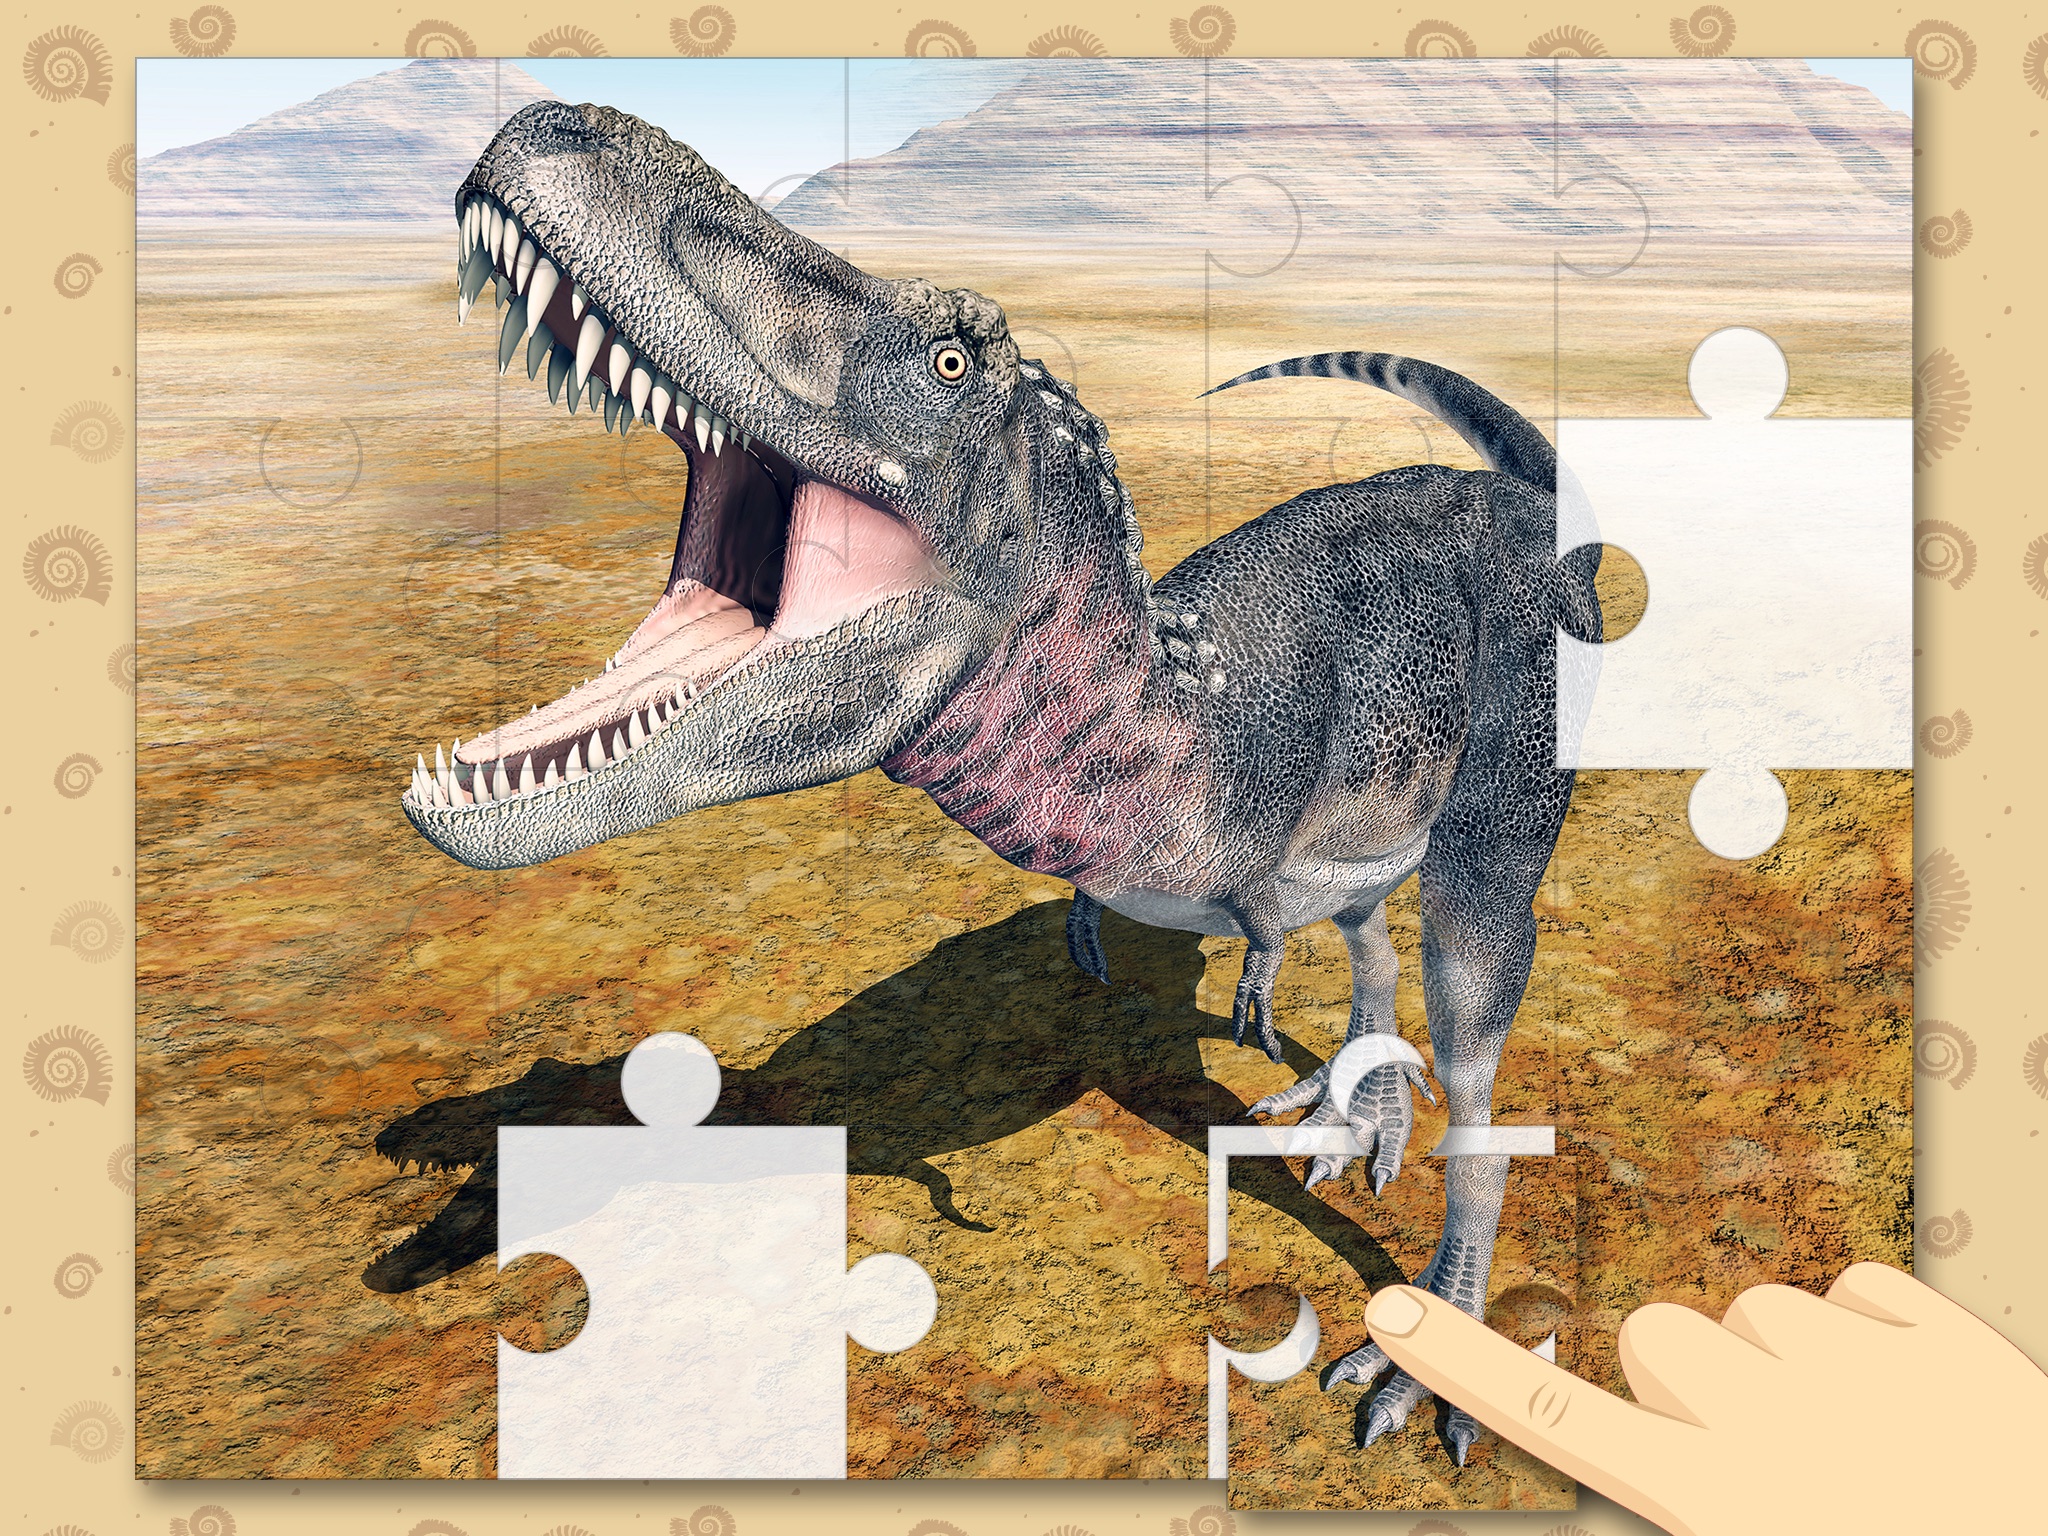 Dinosaurs Prehistoric Animals Jigsaw Puzzles : free logic game for toddlers, preschool kids, little boys and girls screenshot 4